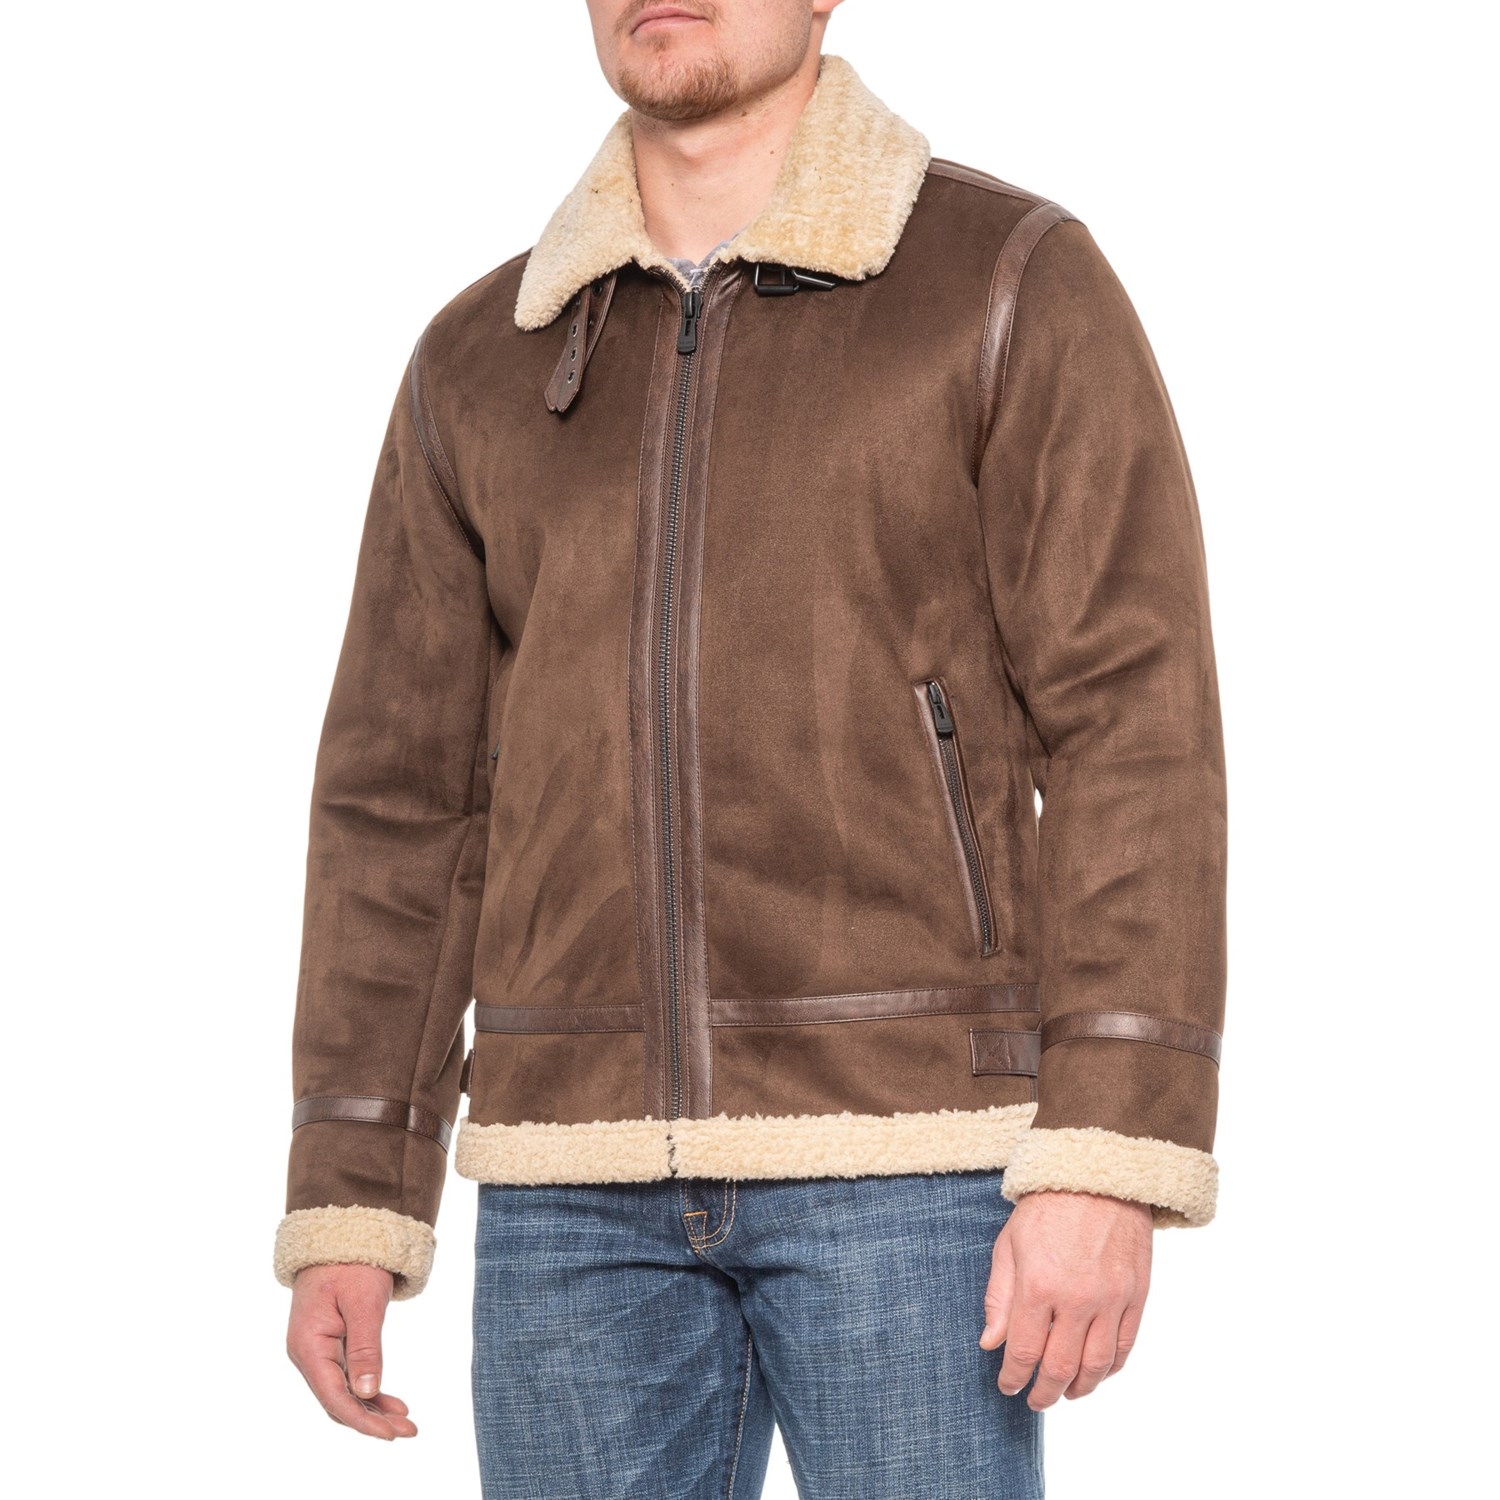 POINT ZERO Brown Faux-Suede Jacket (For Men) - Save 67%